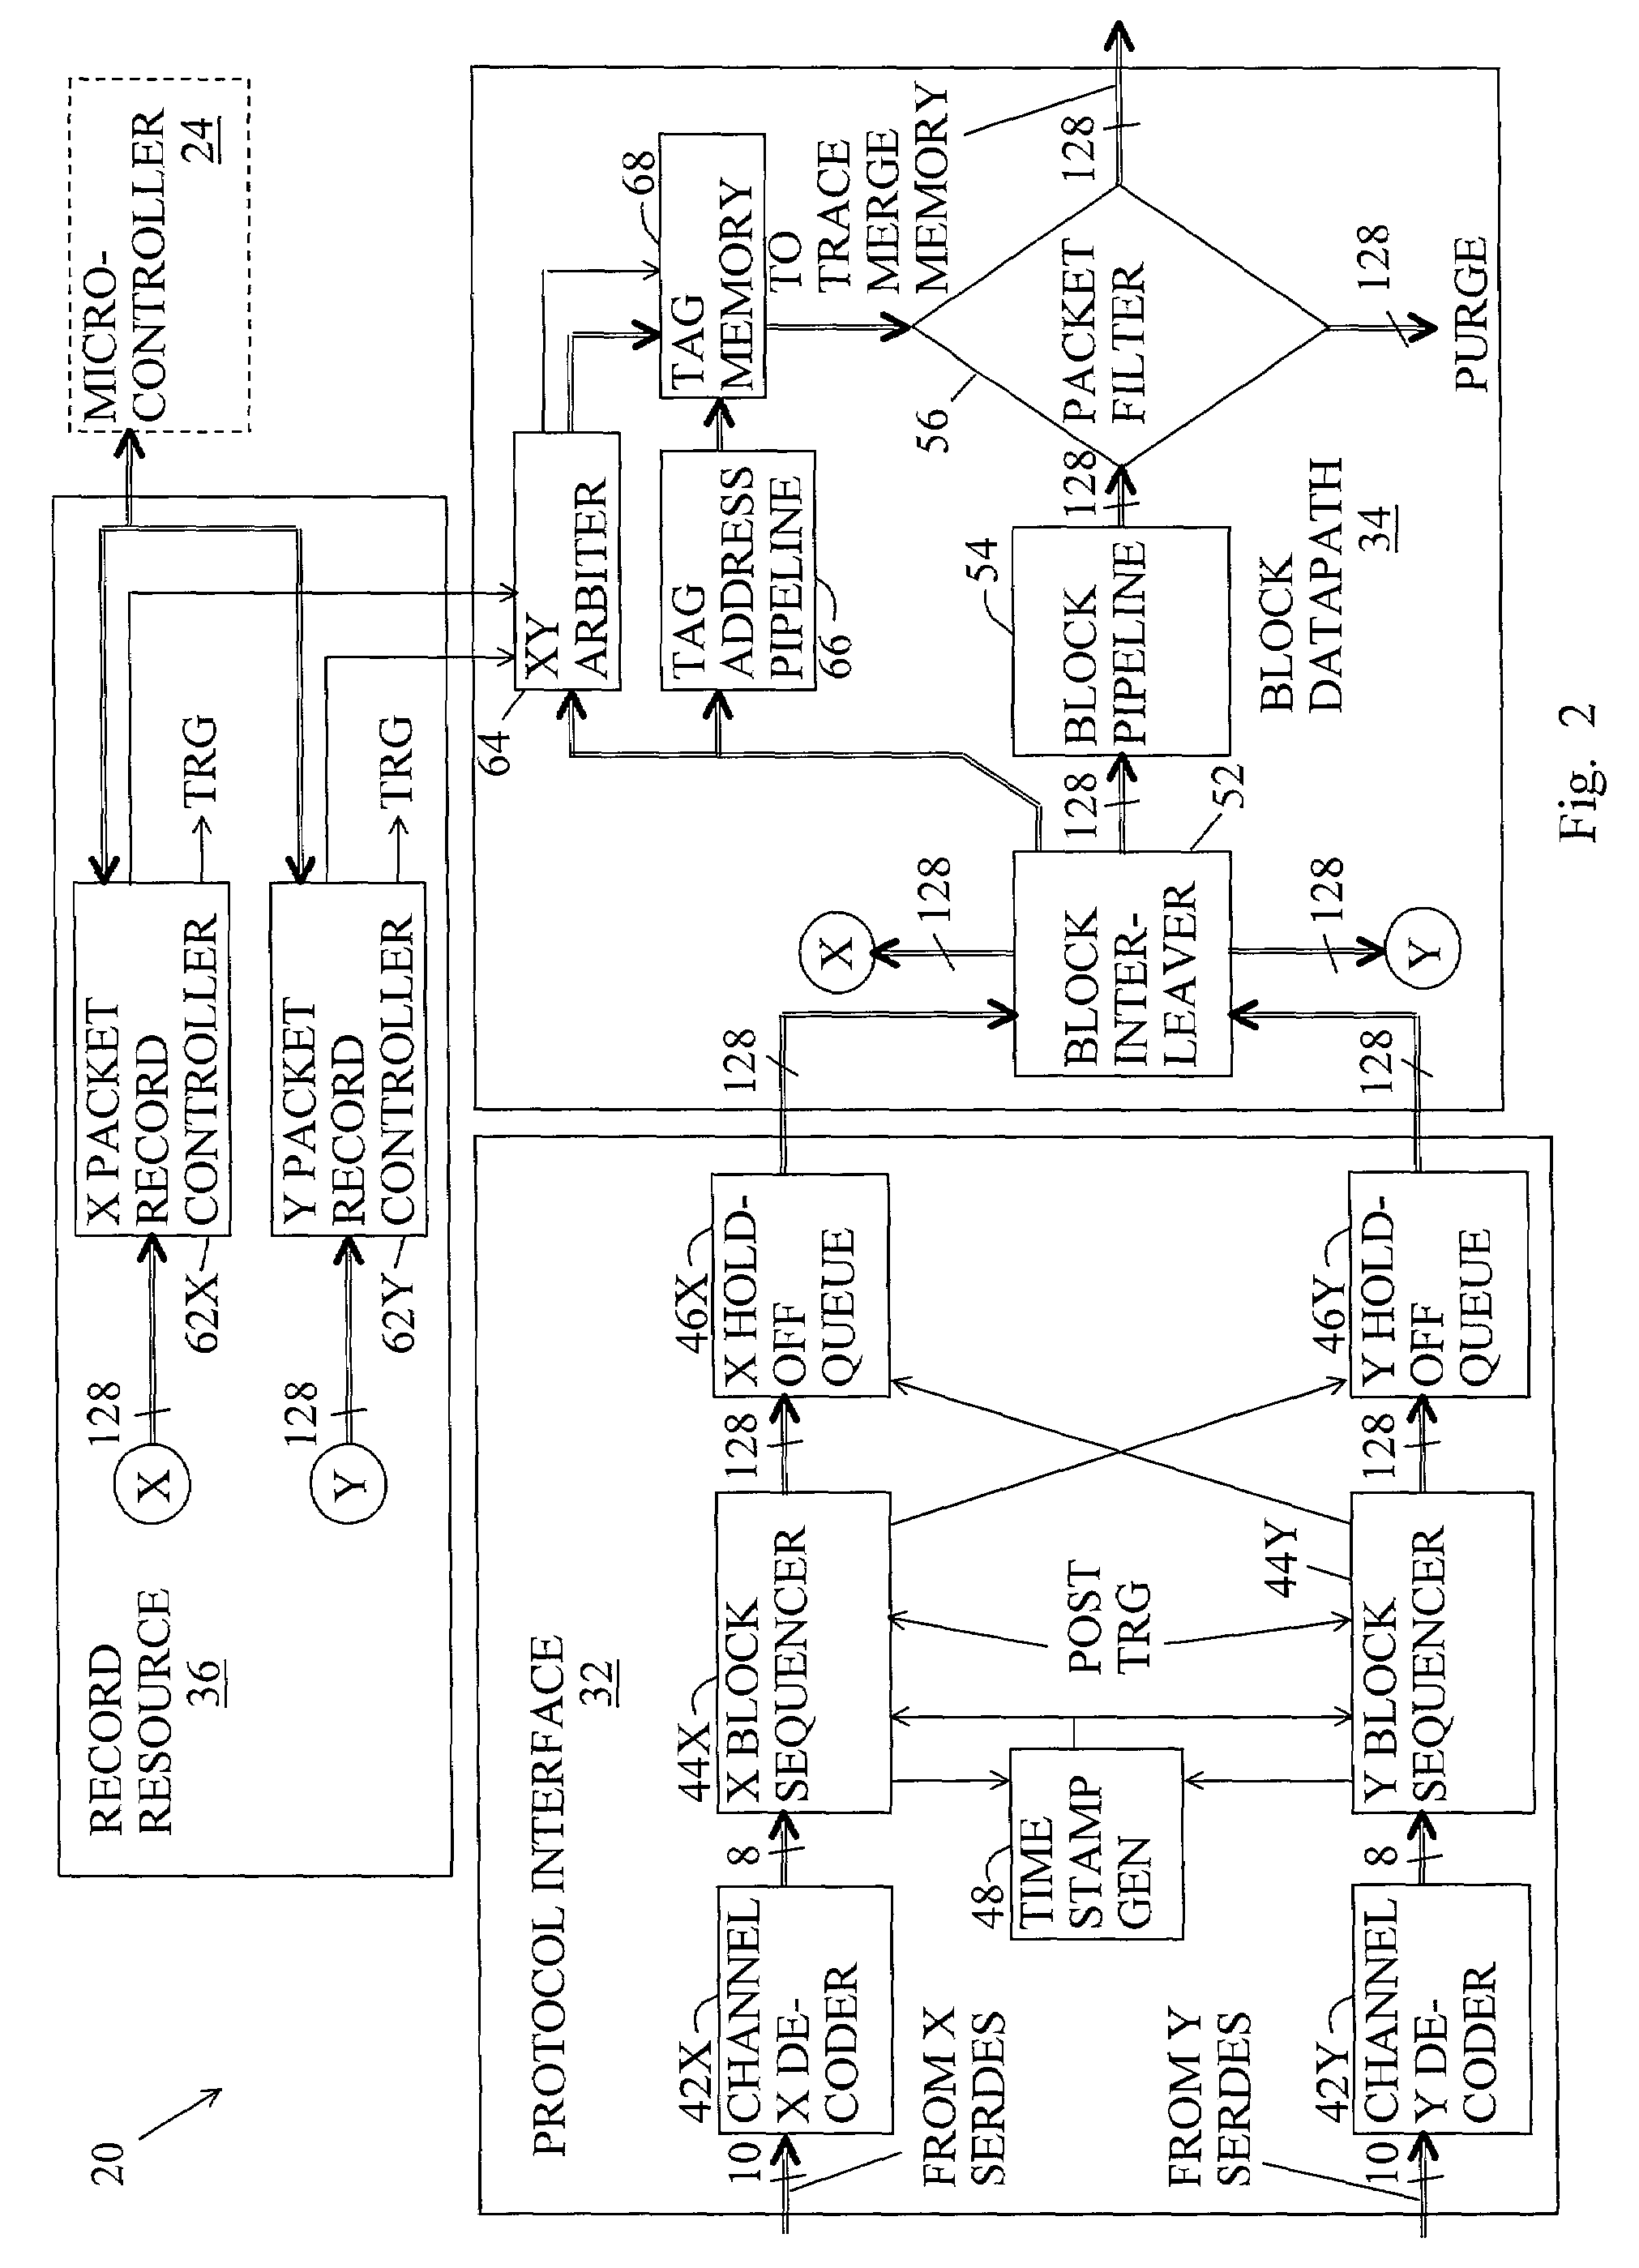 Protocol analyzer and time precise method for capturing multi-directional packet traffic